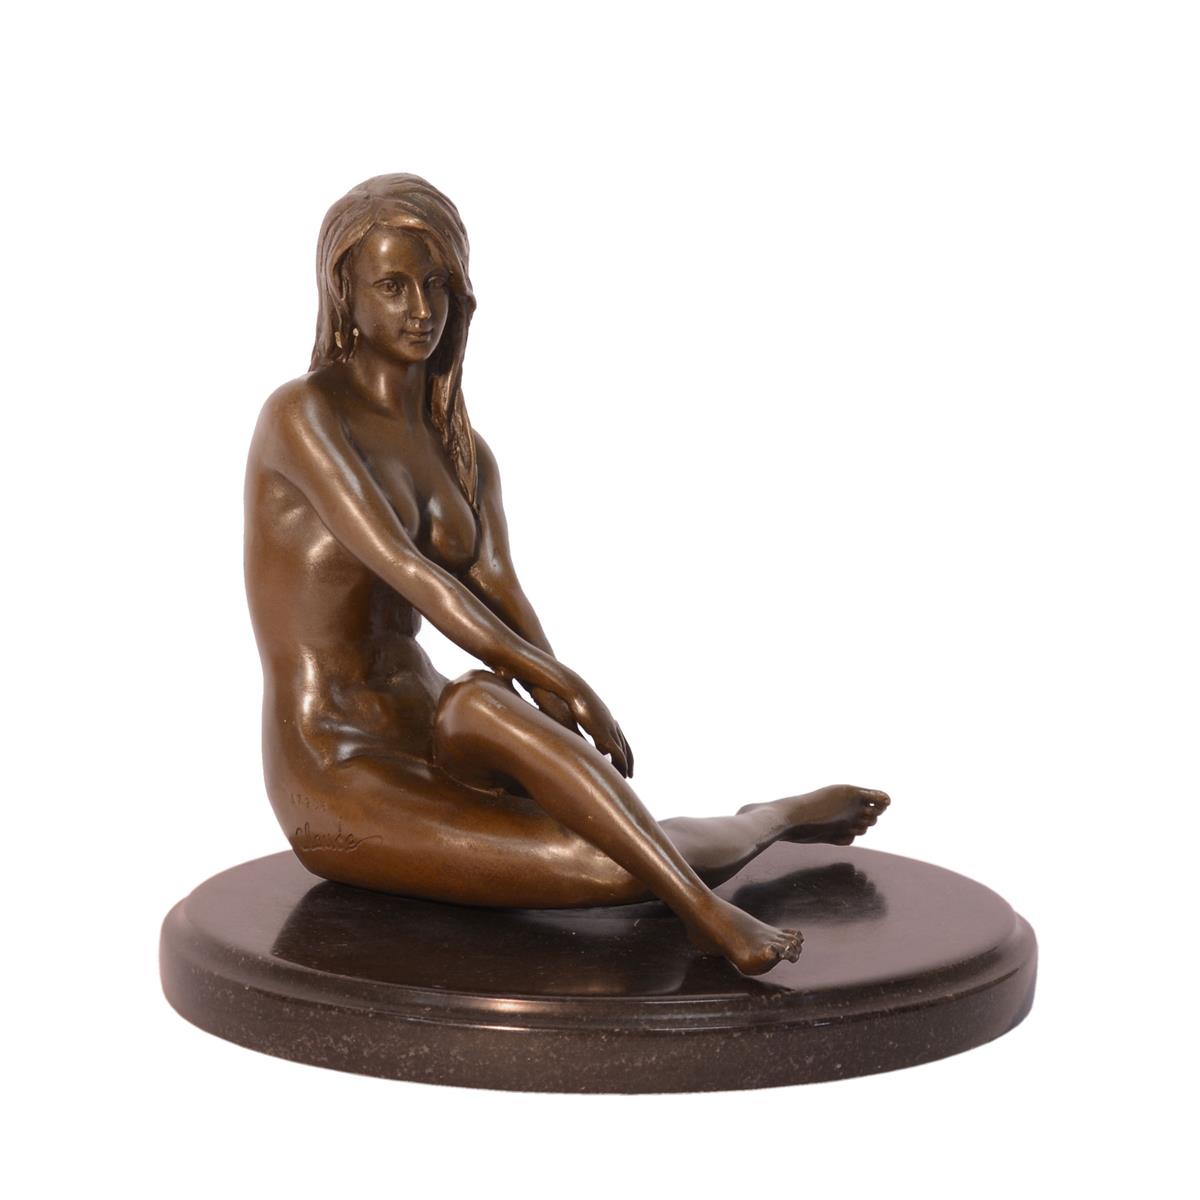 A BRONZE SCULPTURE OF A SITTING NUDE